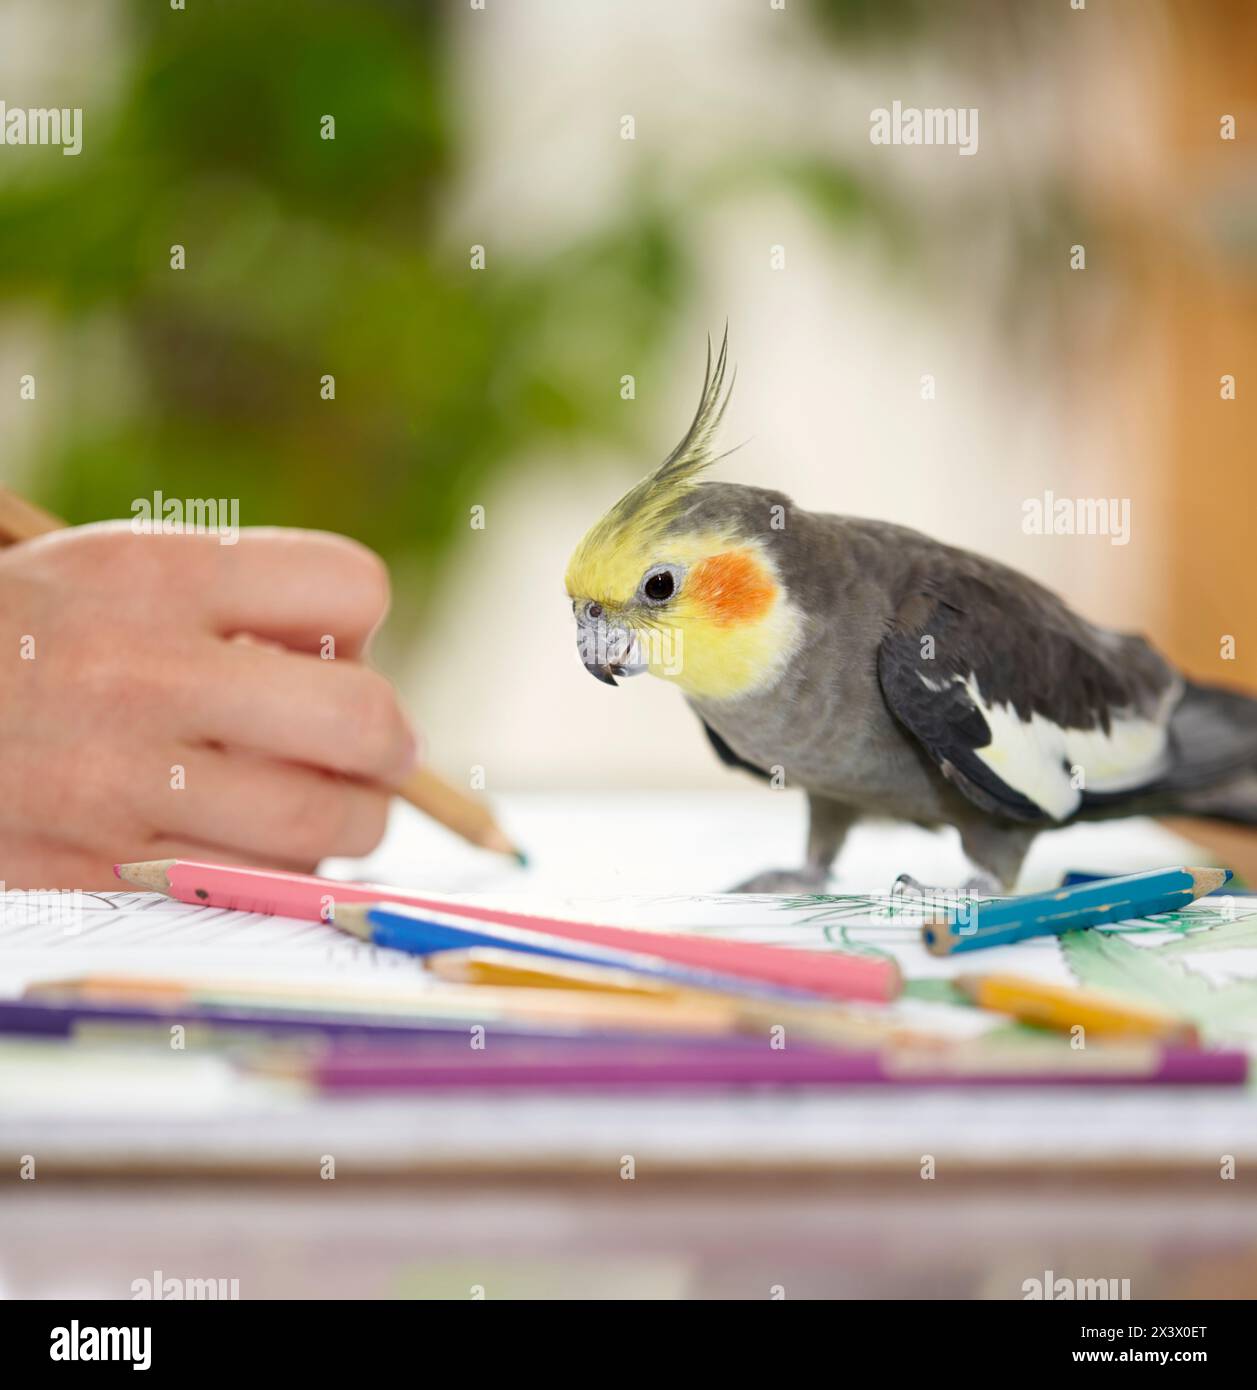 Cockatiel (Nymphicus hollandicus). Adult observes a coloring pencil in the hand of a drawing person. Germany Stock Photo